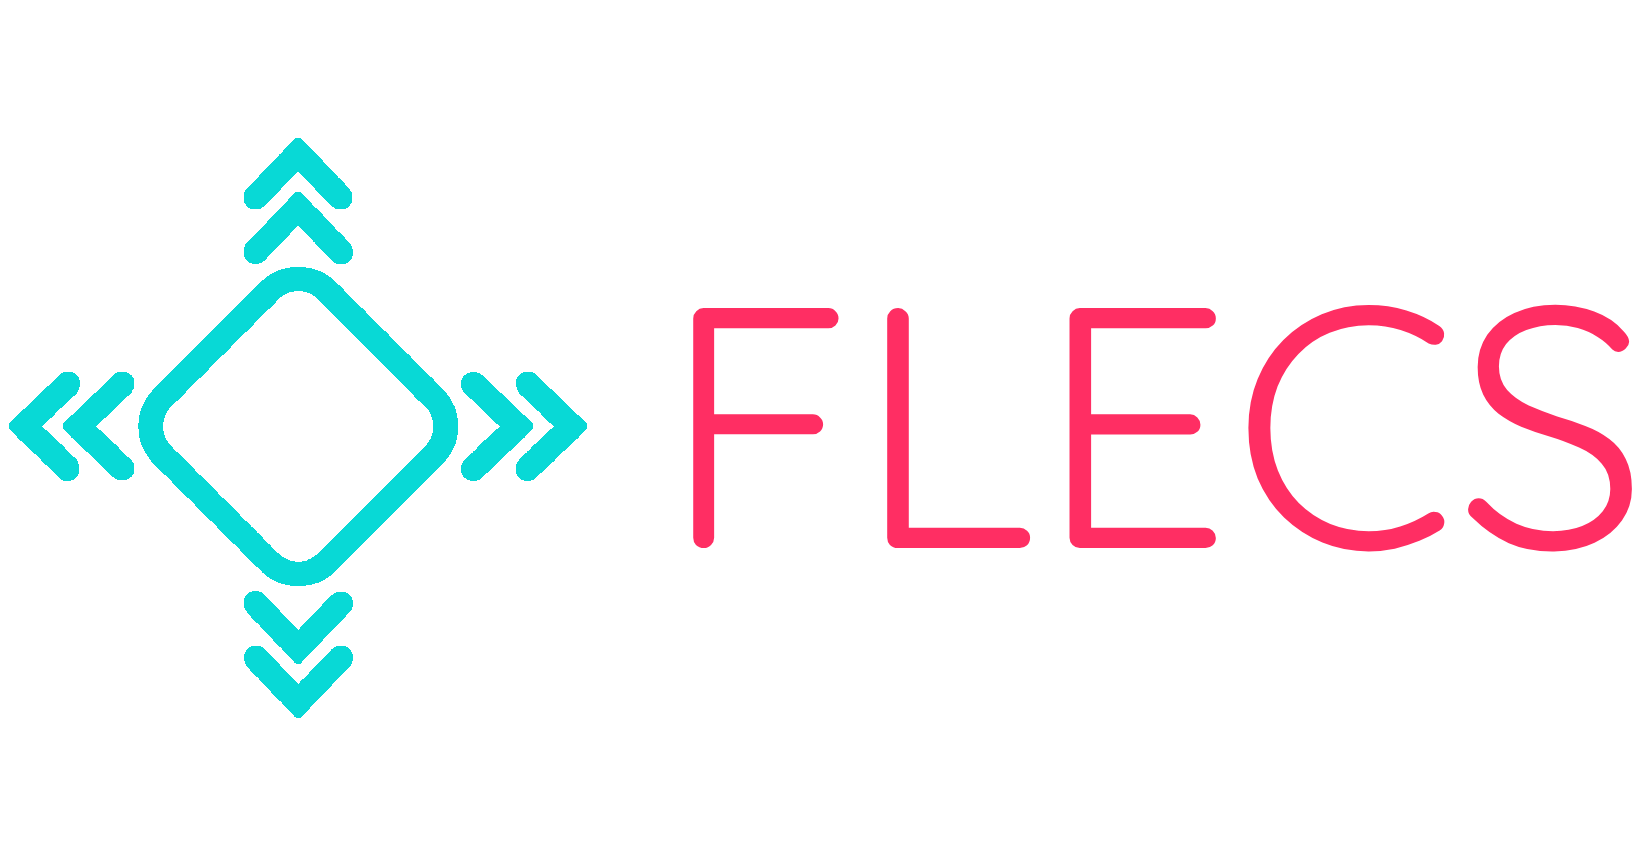 „We can get into customers' applications more easily“ - FLECS